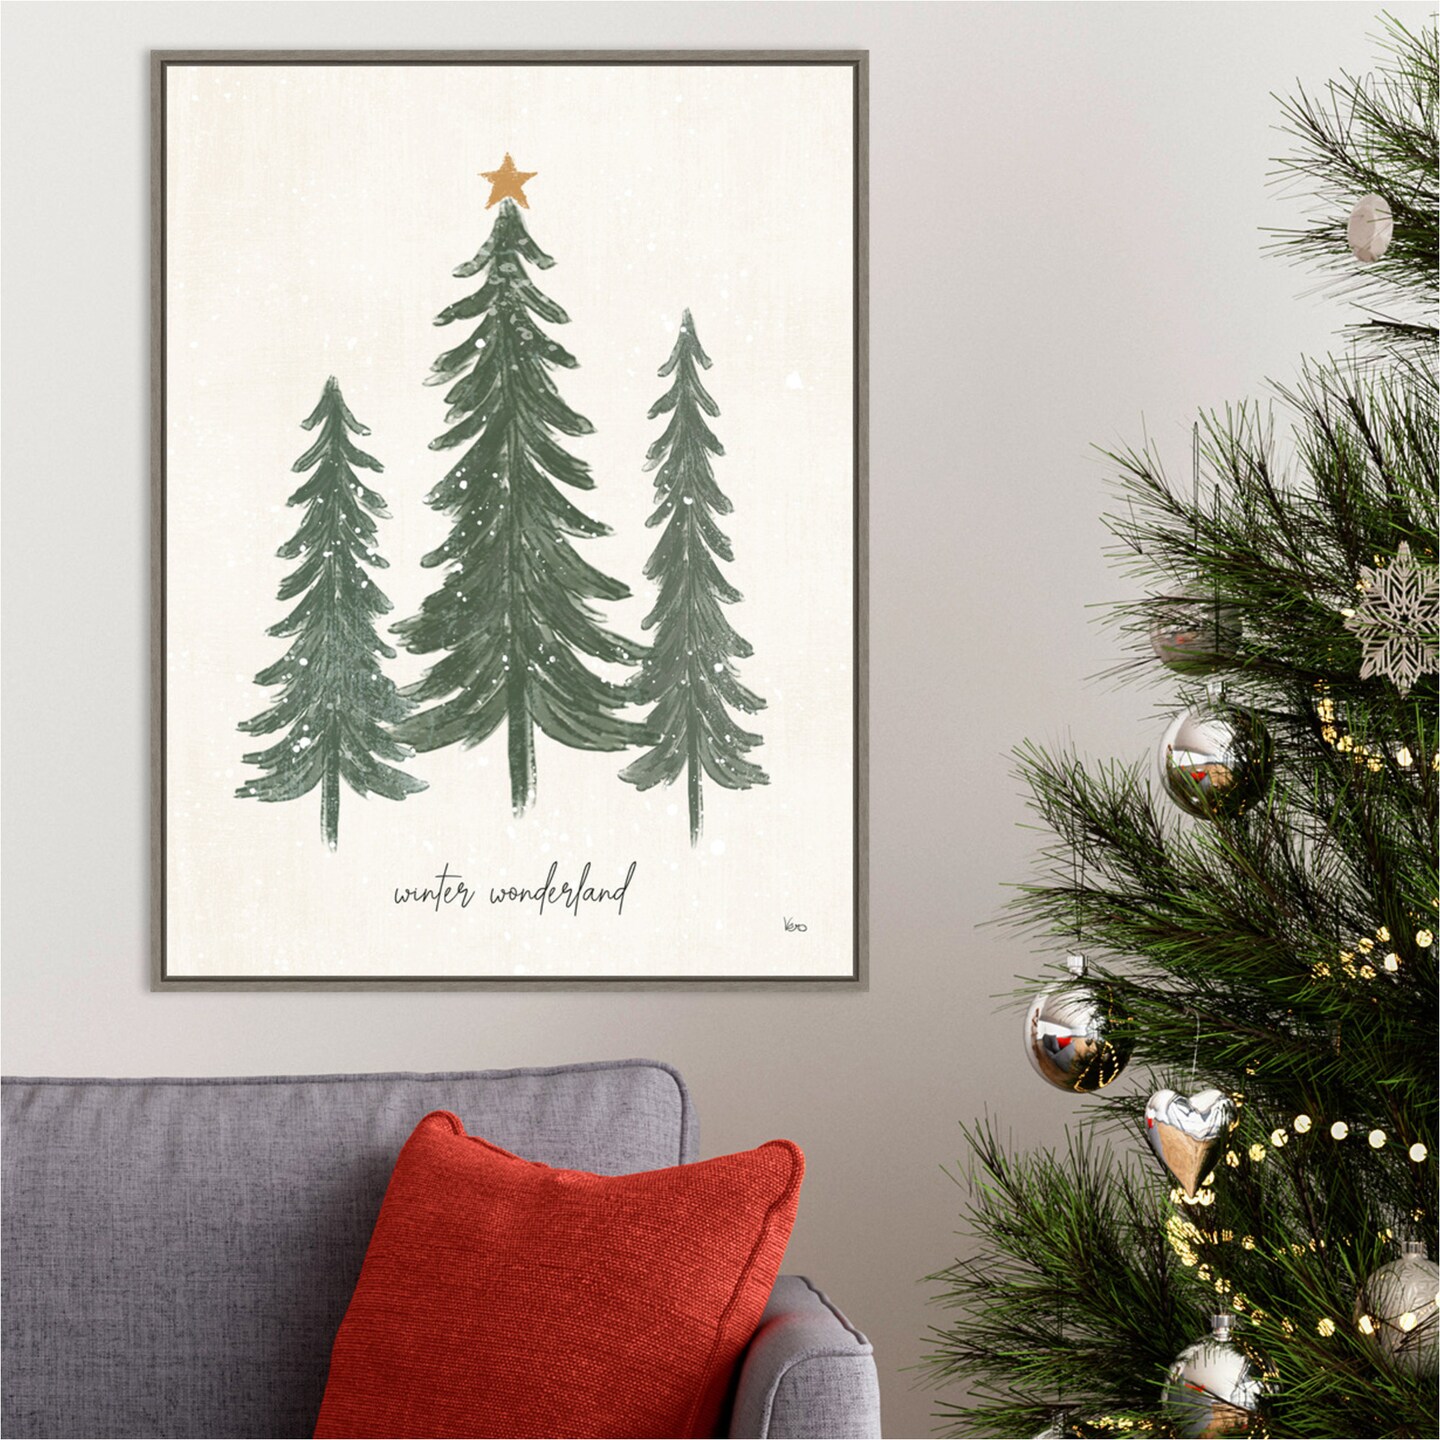 Woodland Christmas Trees by Veronique Charron 23-in. W x 30-in. H. Canvas Wall Art Print Framed in Grey